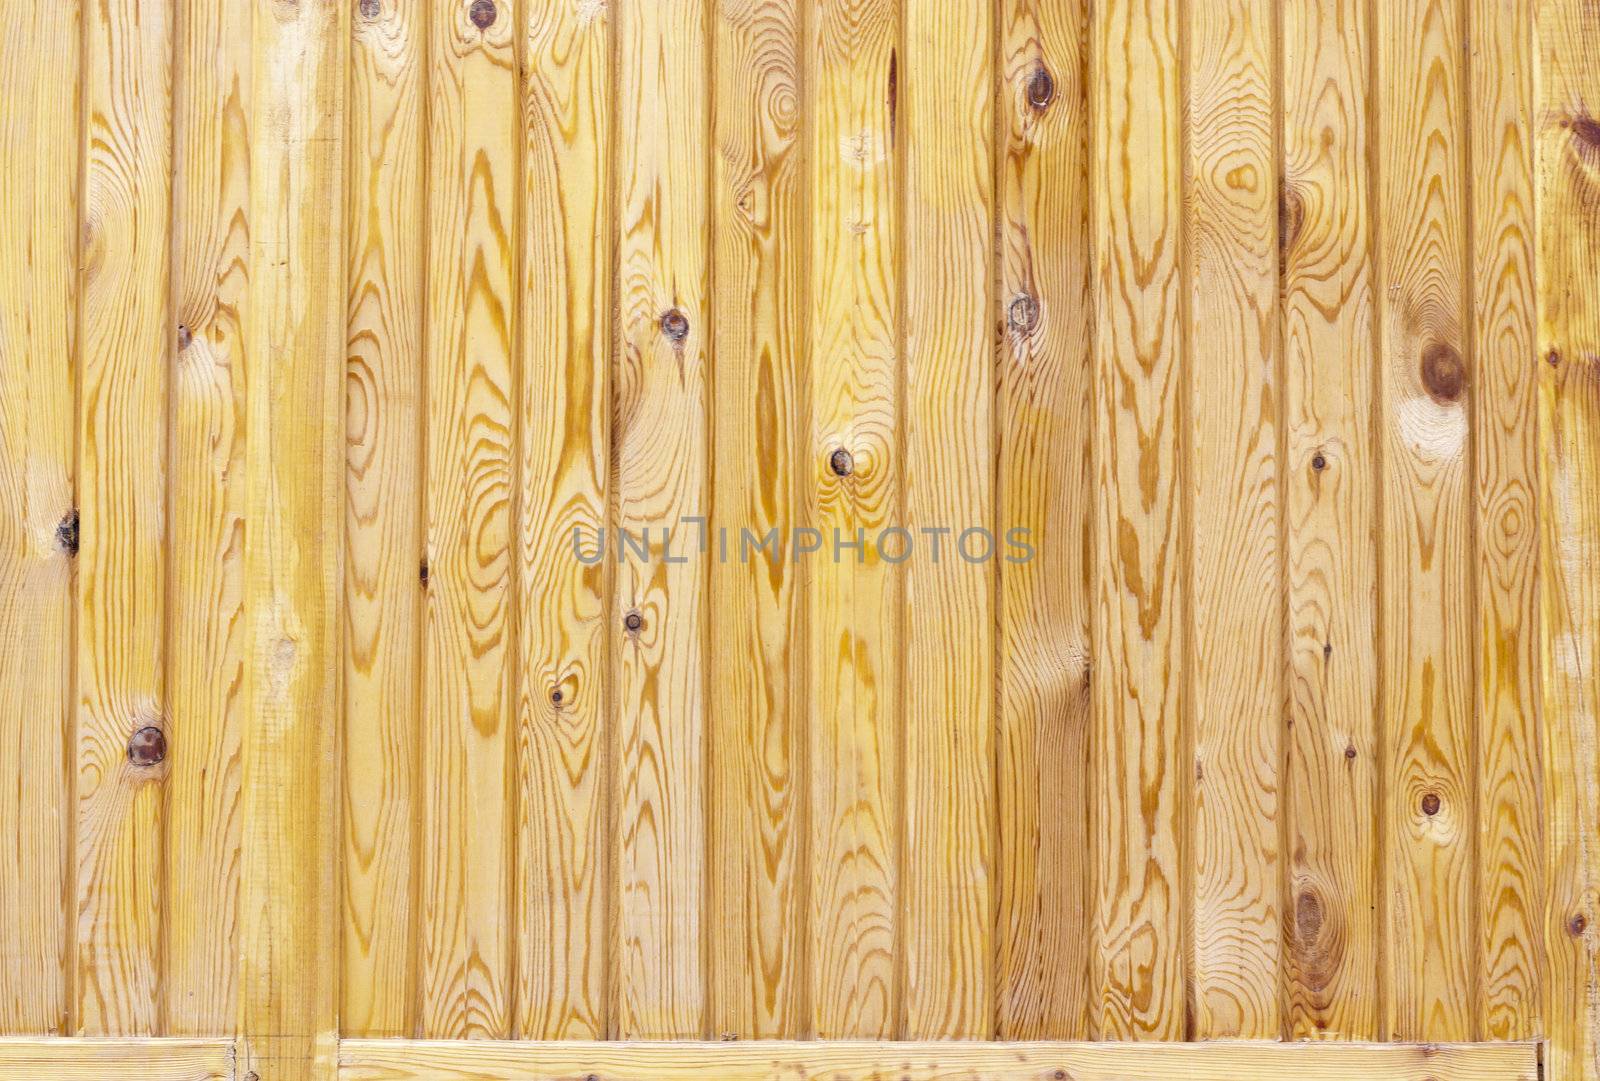 Close up of gray wooden fence panels  by schankz